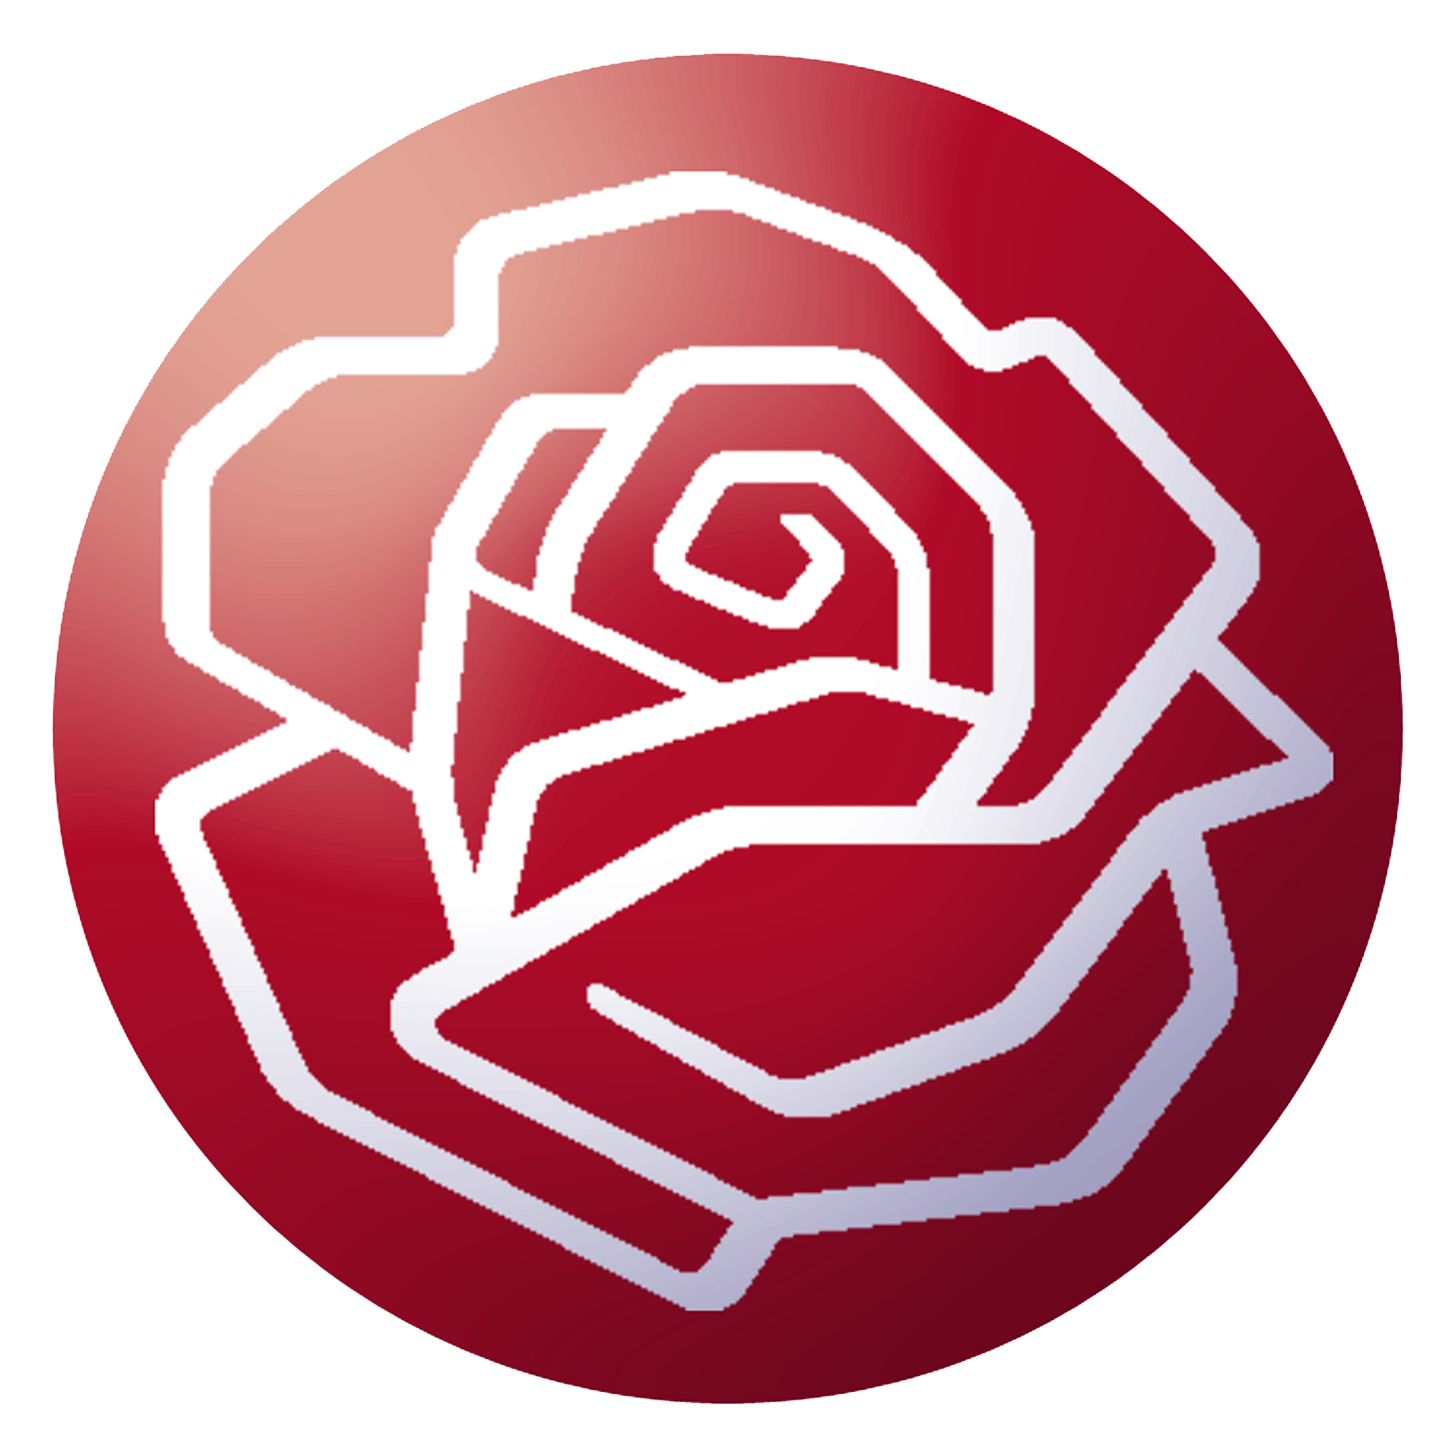 Socialist Logo - Image - Socialist Party of Granida rose.png | New Continent Wiki ...